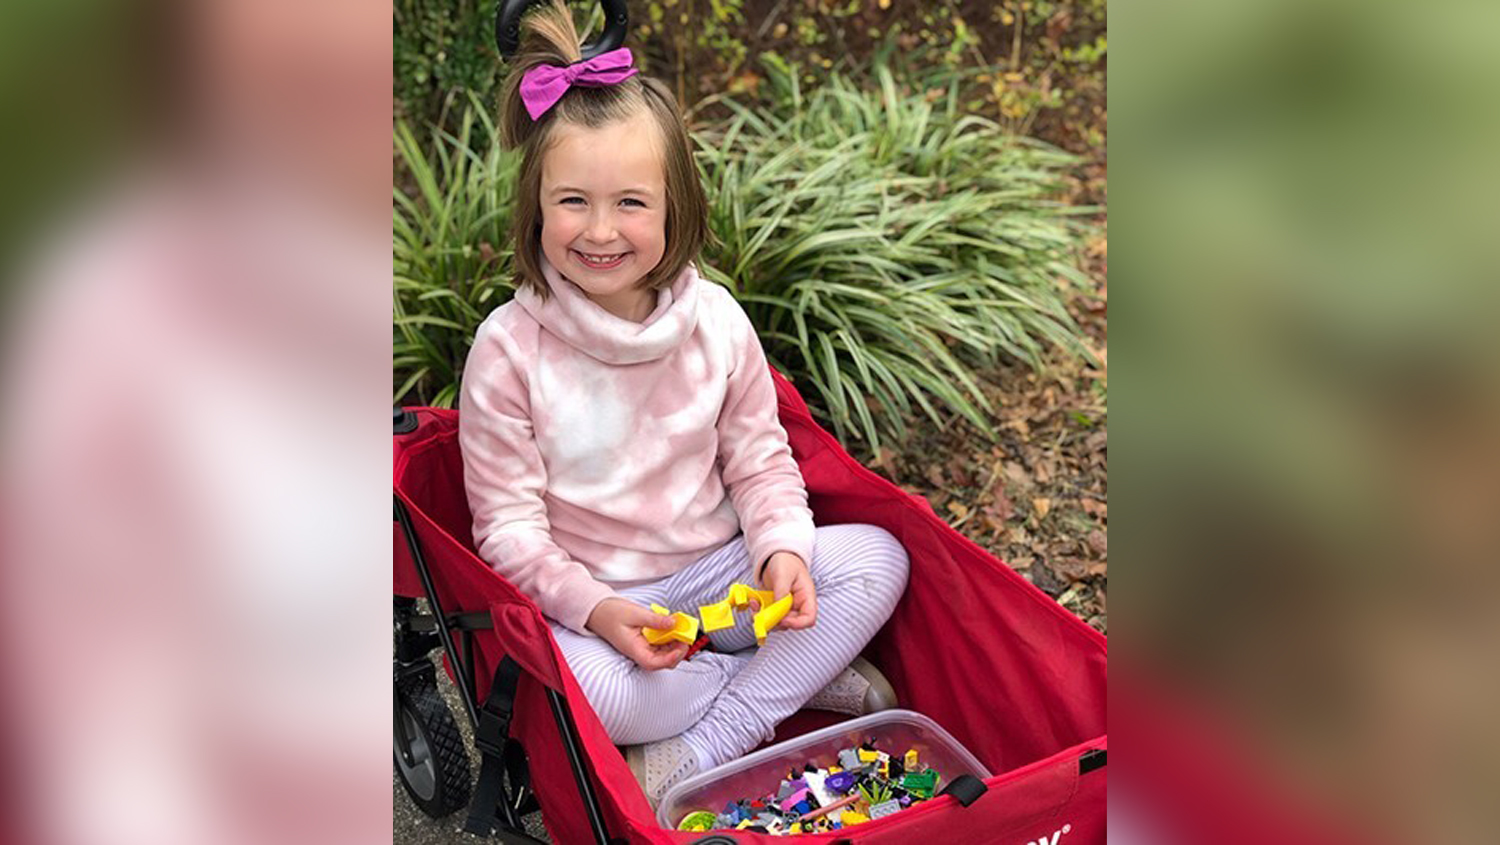 7-Year-Old Cancer Survivor Helps Raise Thousands for Gifts to Give Hospitalized Kids